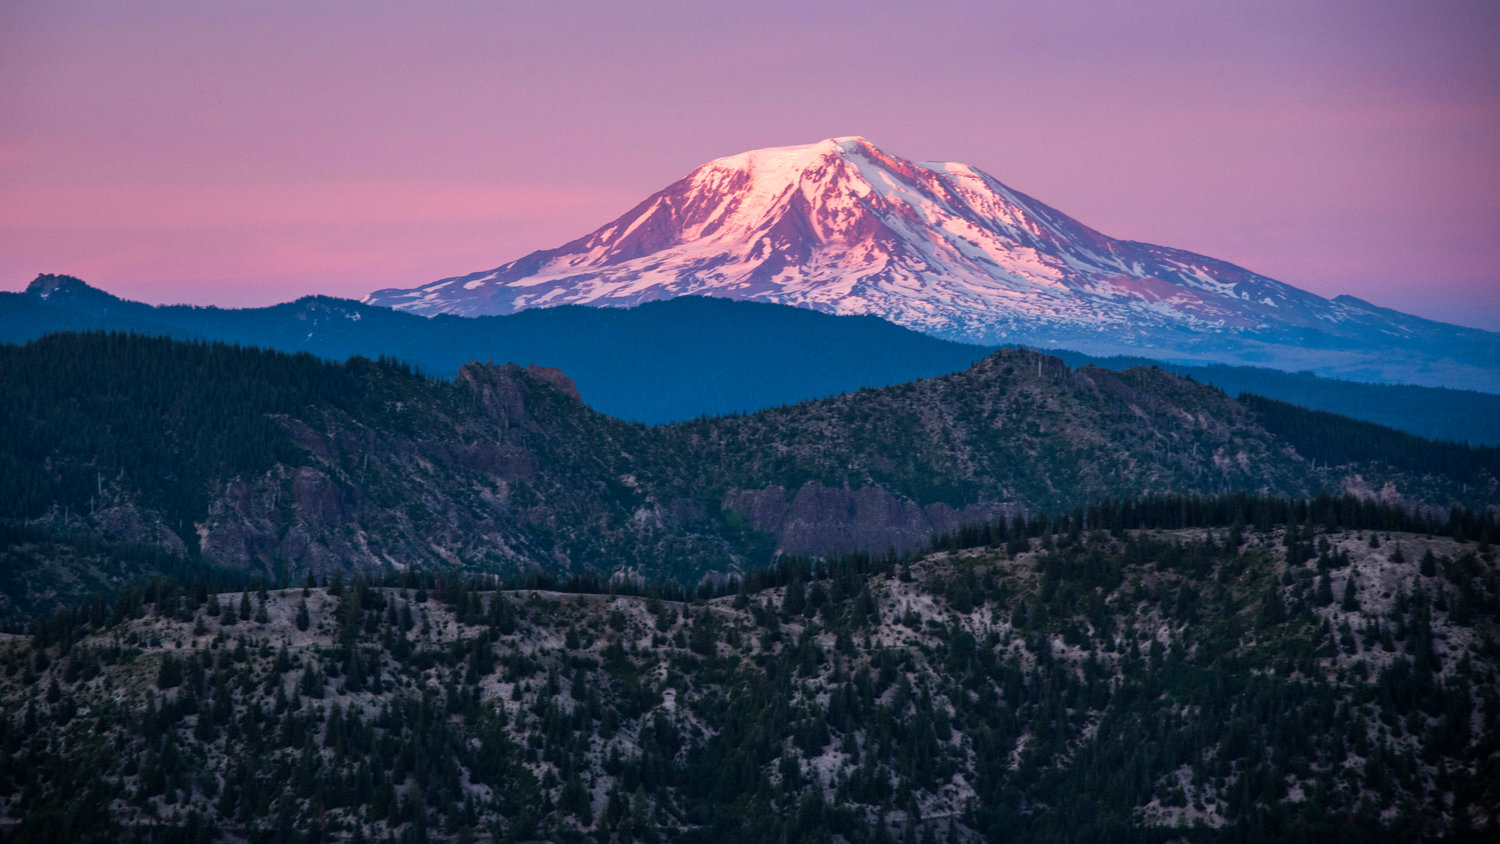 Mount Adams is illuminated in purple haze at sunset seen from the Gifford Pinchot National Forest on Thursday.